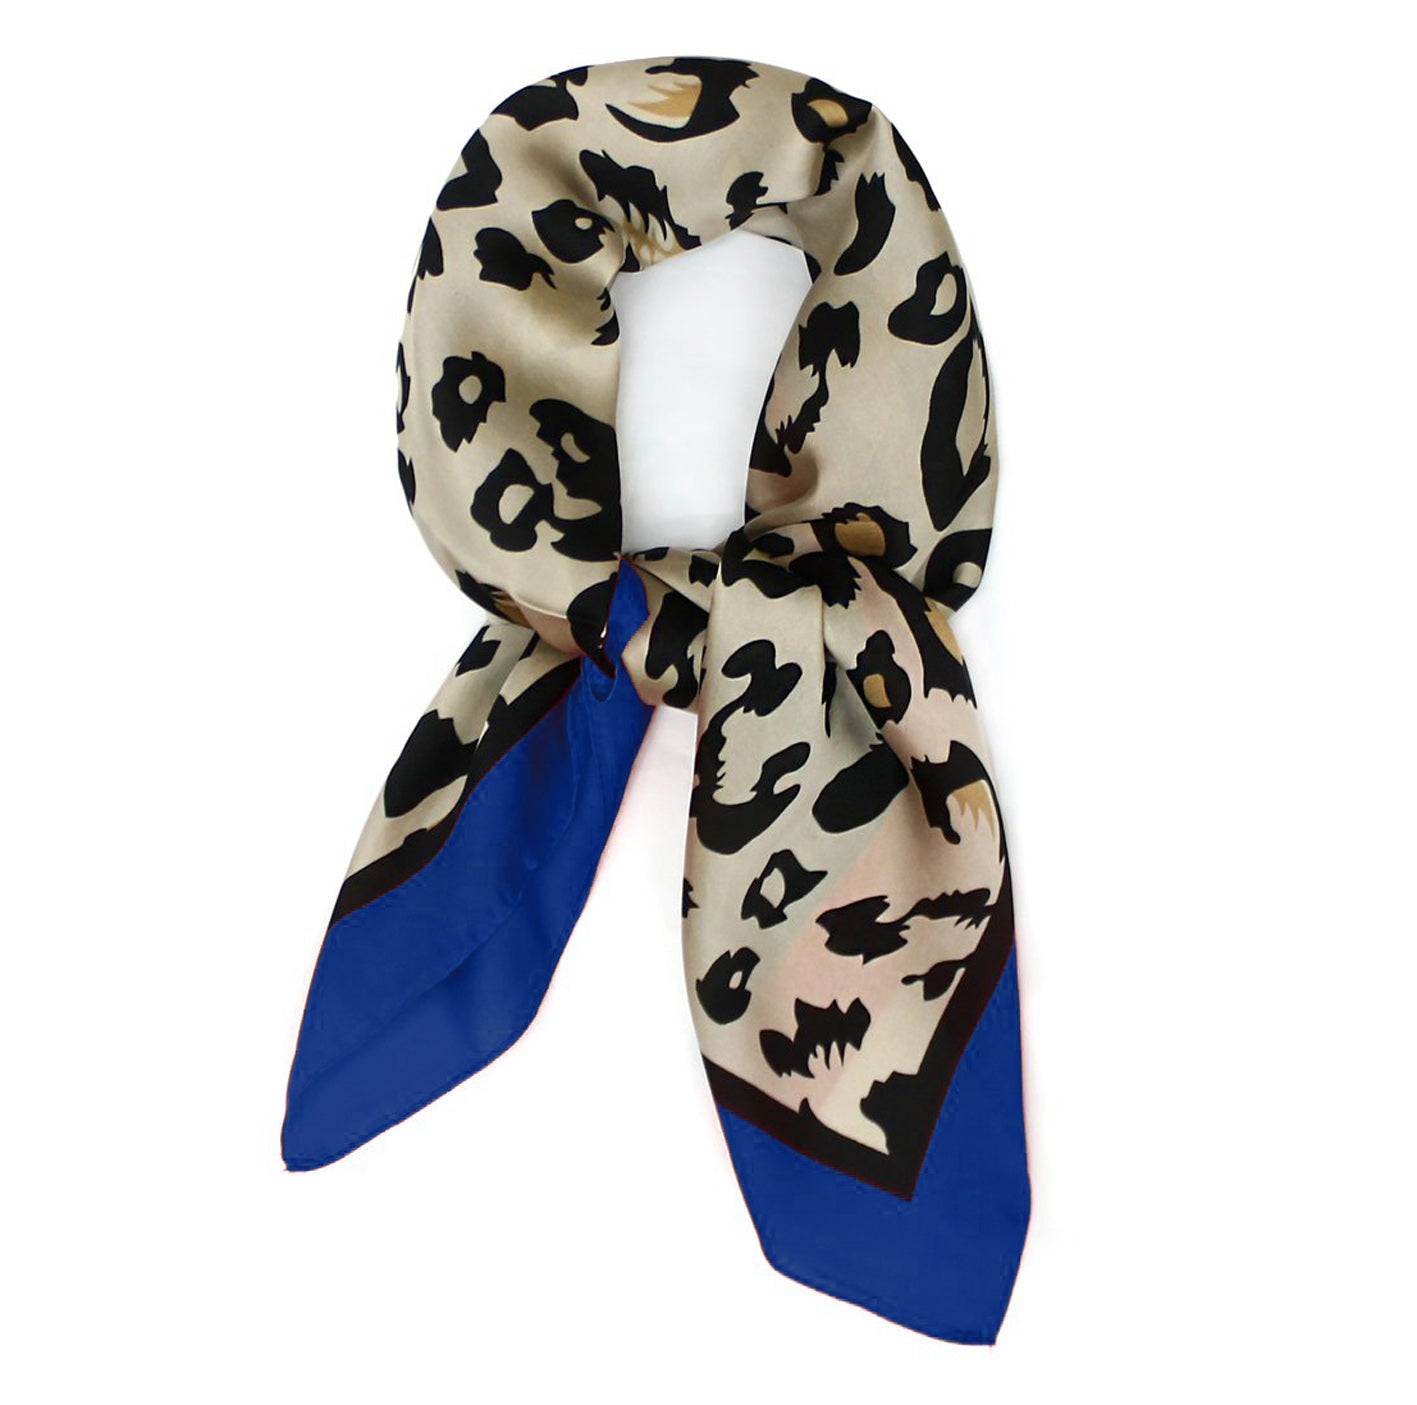 Leopard Animal Print with Blue Border Thin Silky Scarf for Summer and Spring